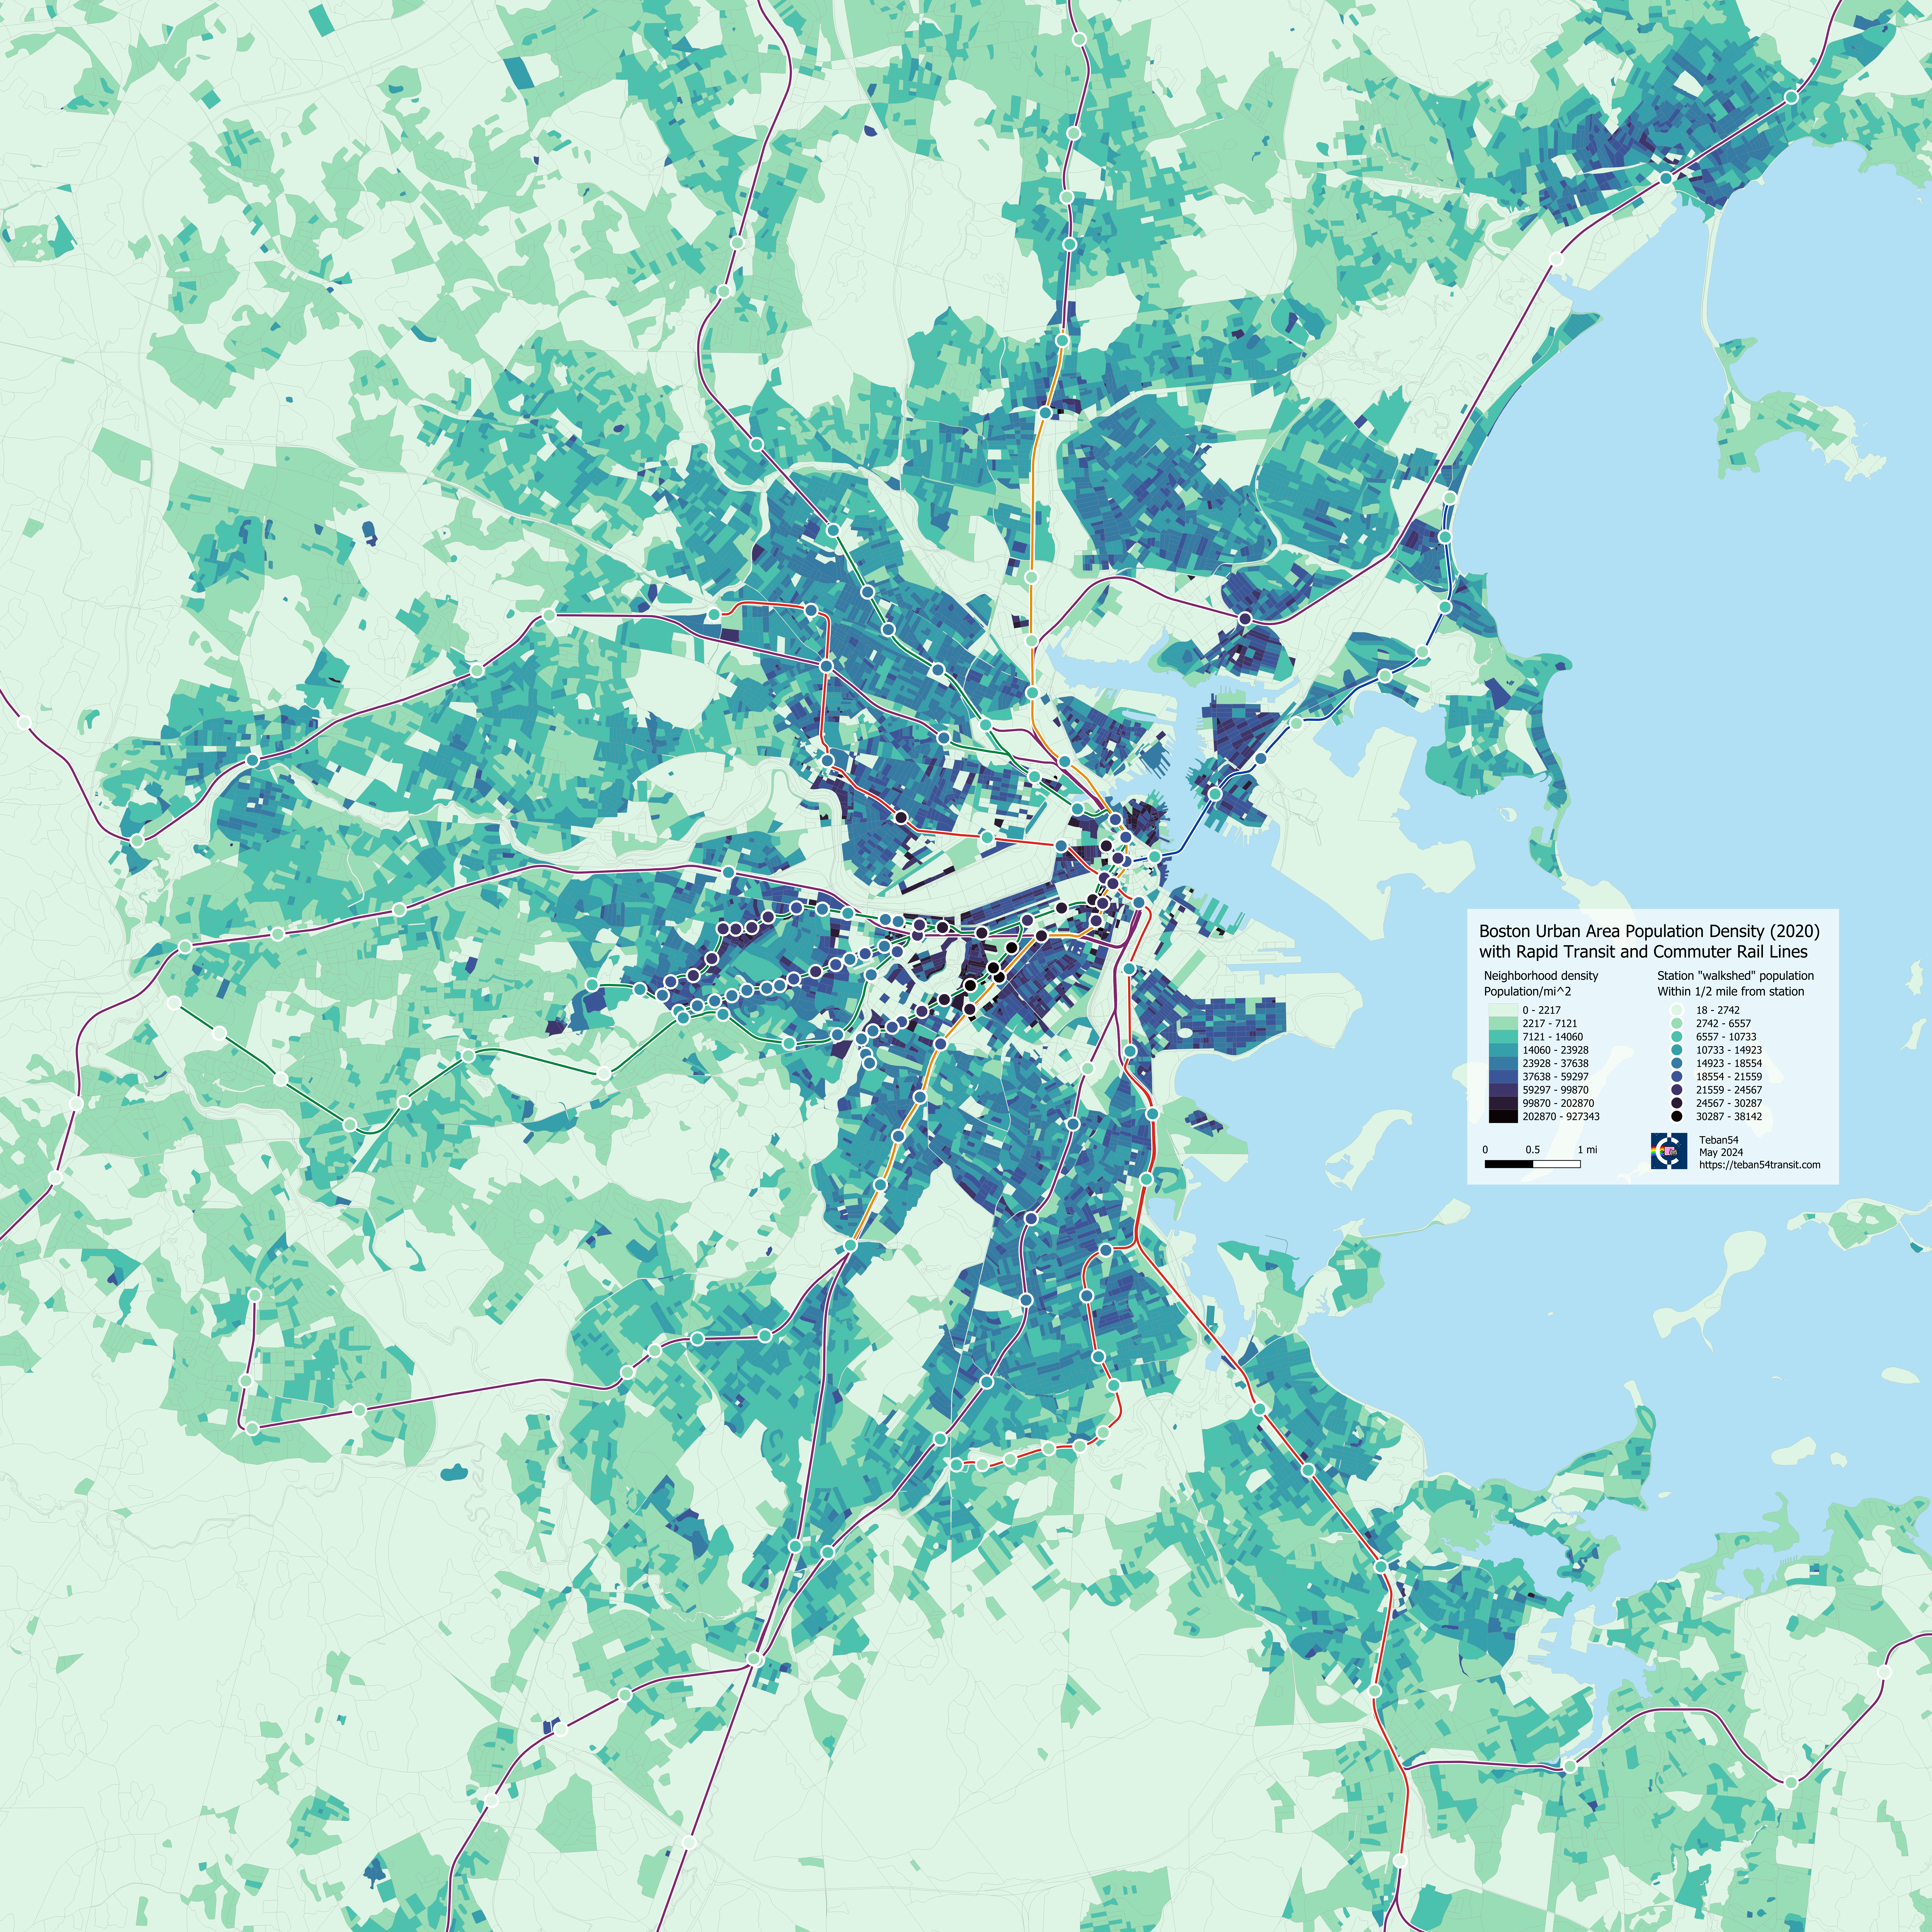 Data: Population Density Map of Boston with Transit Lines